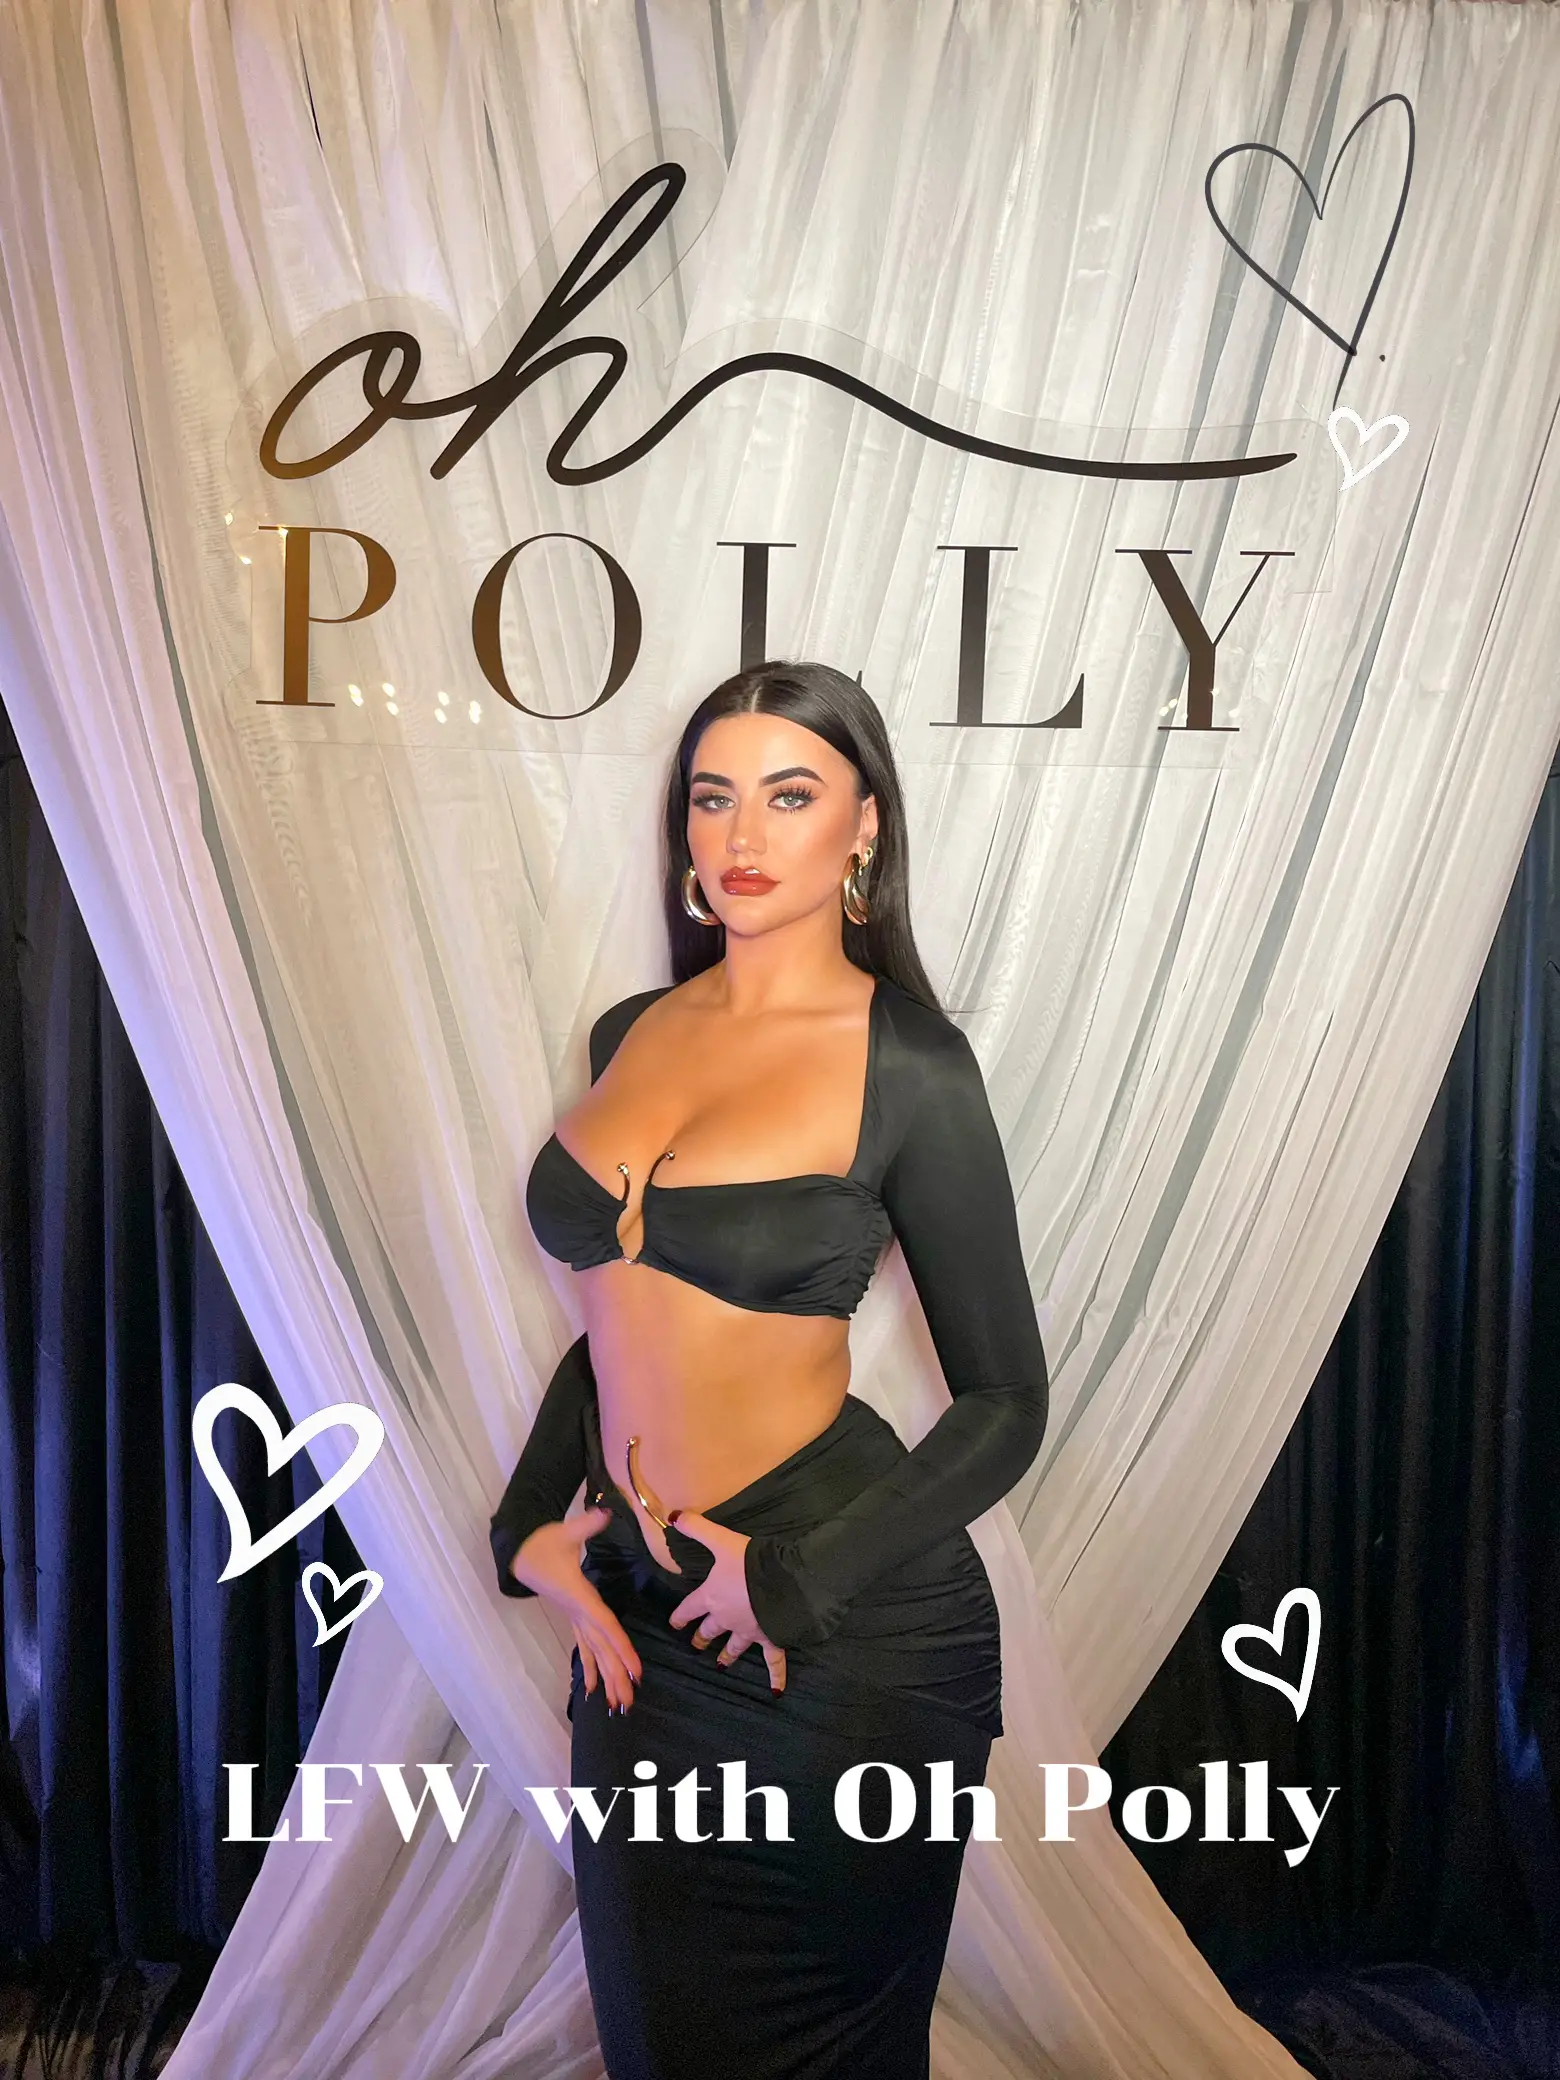 Introducing the Oh Polly girl: The ultra glam party princess